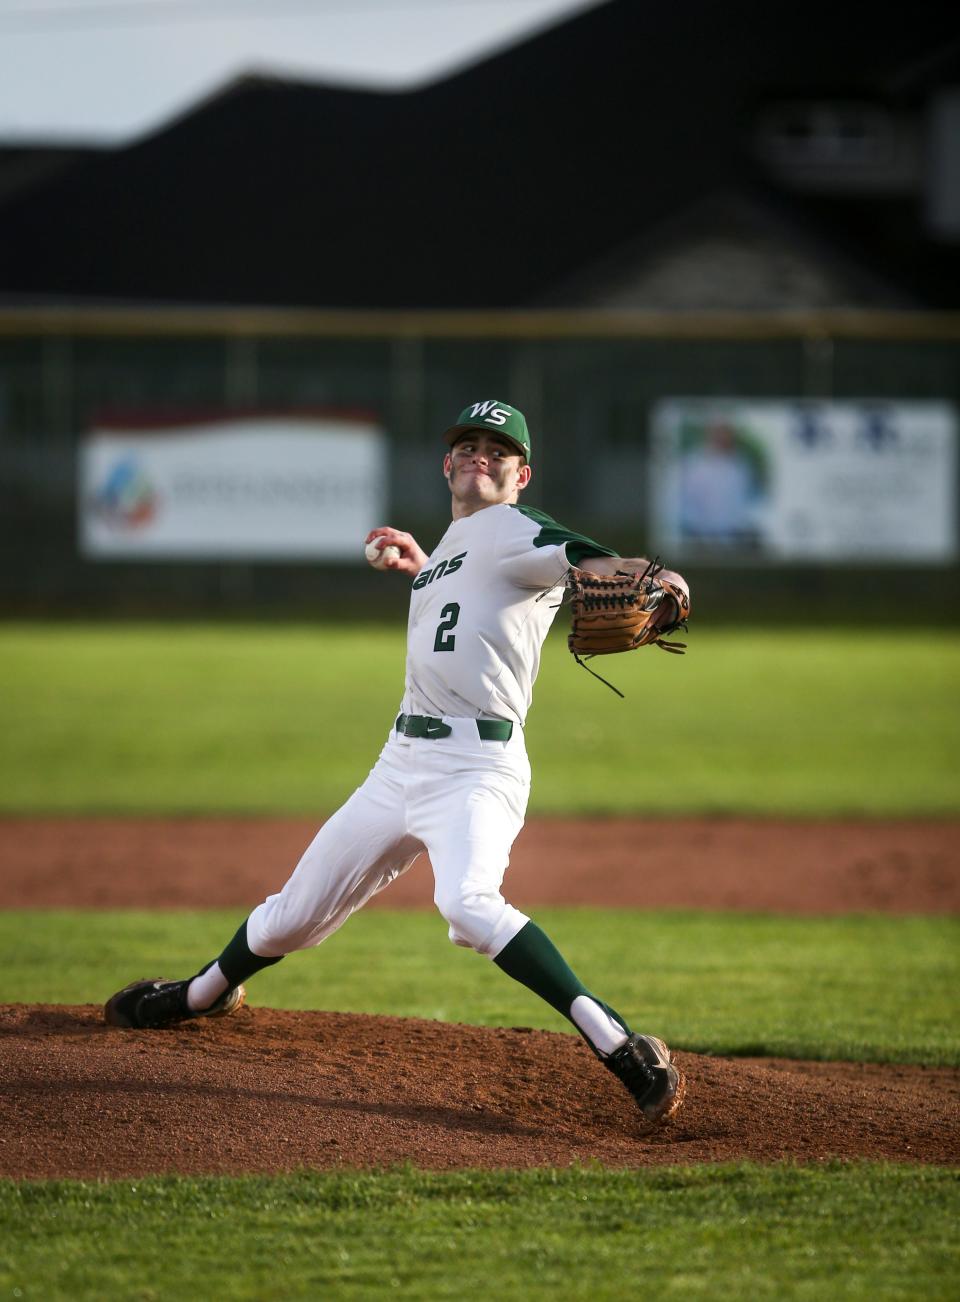 West Salem's Brody McMullen (2) throws a pitch during the game against Central Catholic on Tuesday, March 15, 2022 in Salem, Ore.